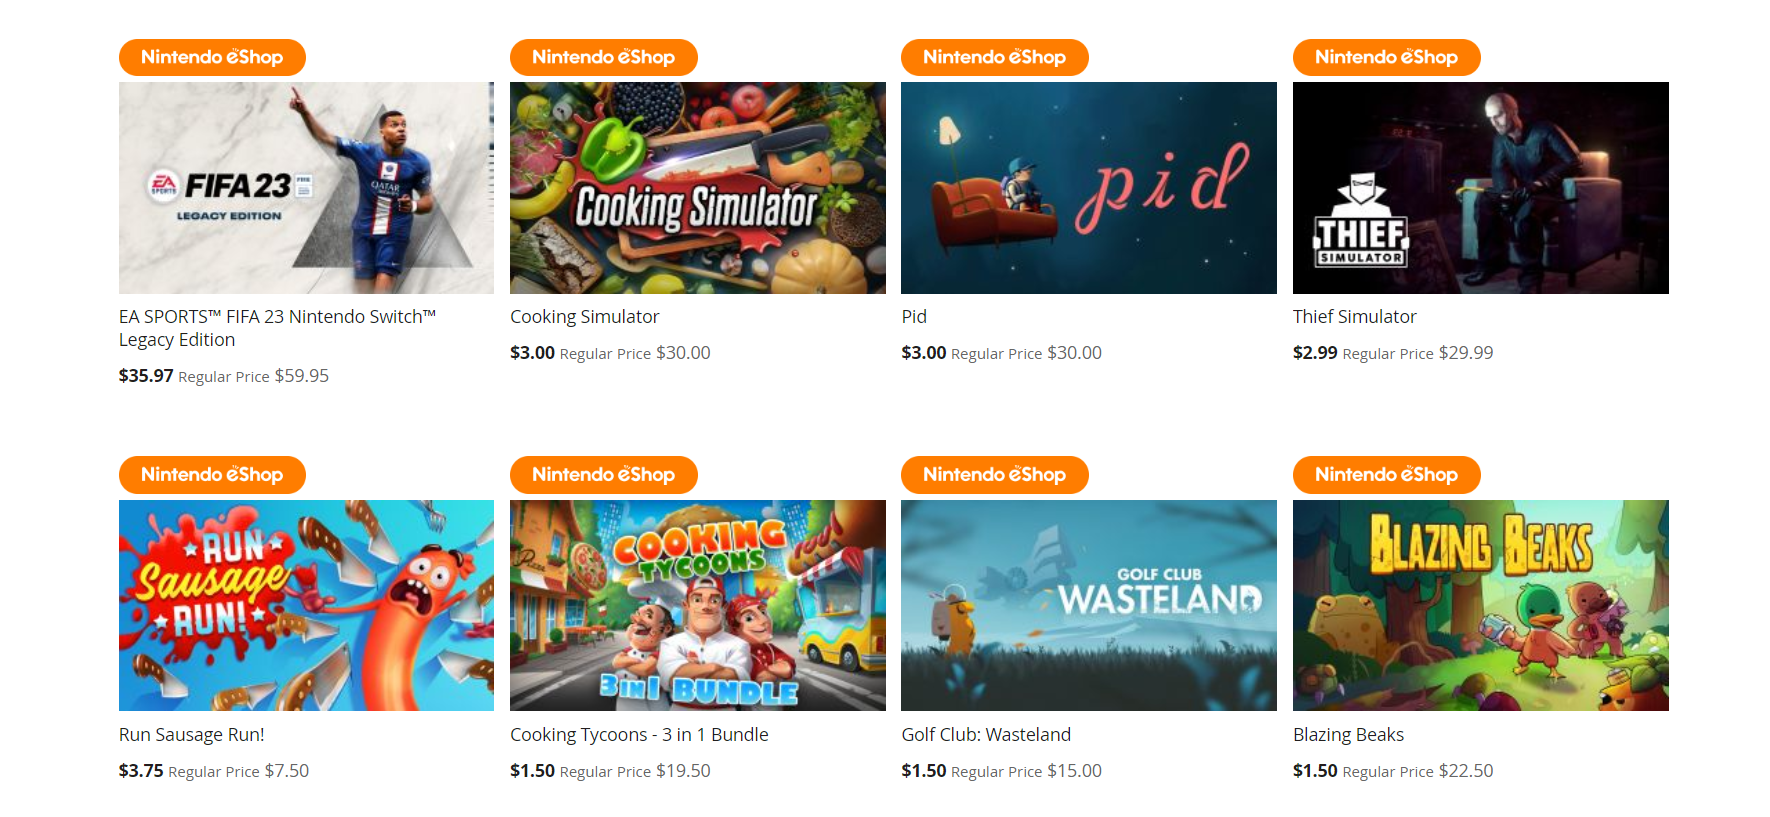 Up to 75% OFF on thousands of digital games at Nintendo eShop